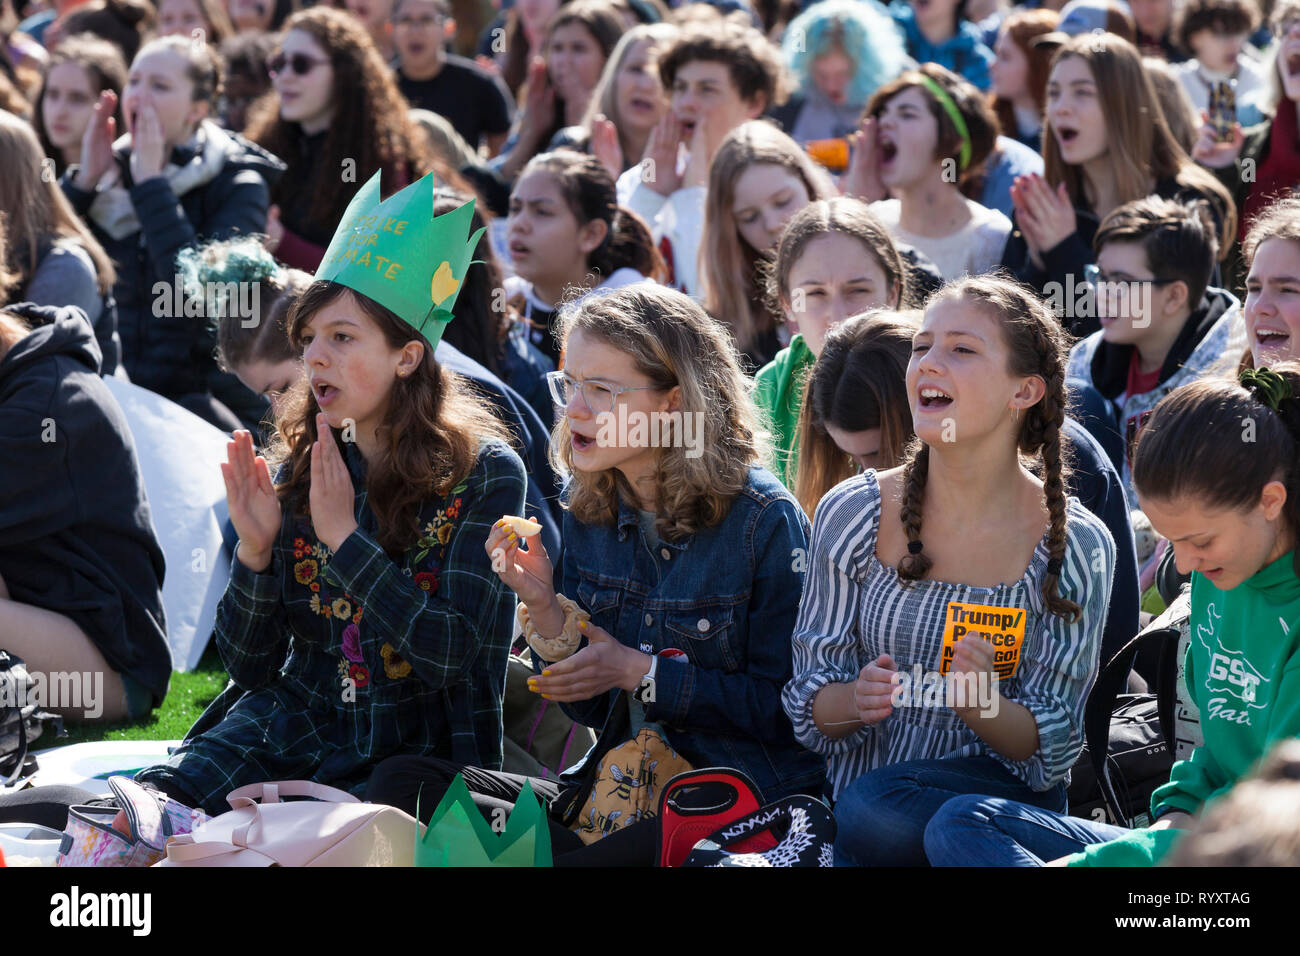 Seattle, Washington: Supporters from all over the region cheer at a rally in Cal Anderson Park in support of the Green New Deal and to draw attention to the lack of action on climate change. The Seattle Youth Climate strike was held in is solidarity with the worldwide Climate Strike movement. Credit: Paul Christian Gordon/Alamy Live News Stock Photo